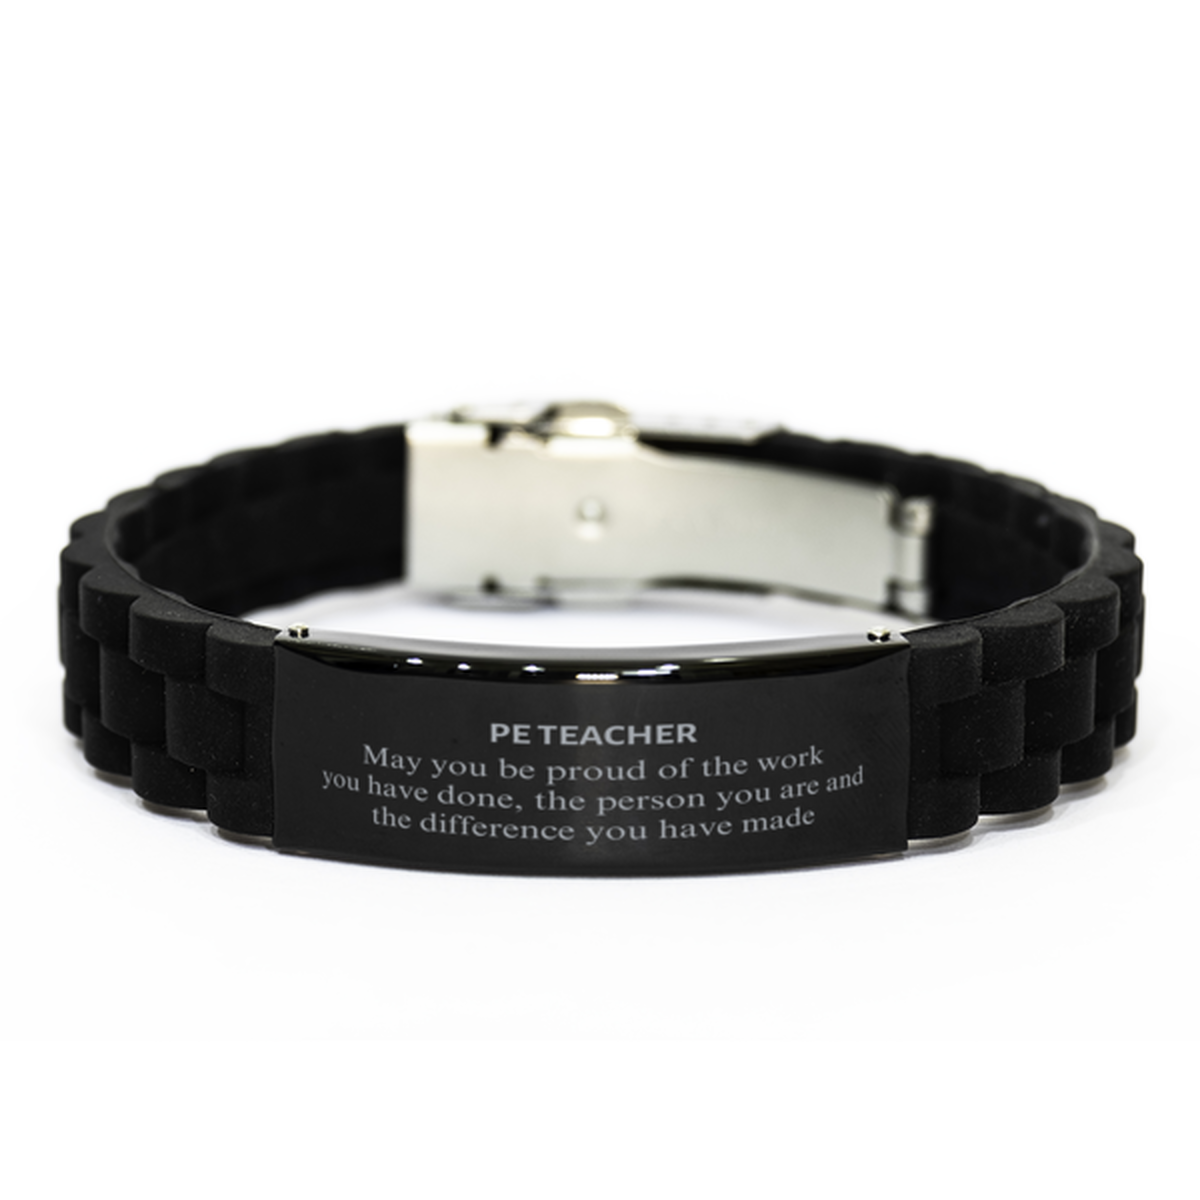 PE Teacher May you be proud of the work you have done, Retirement PE Teacher Black Glidelock Clasp Bracelet for Colleague Appreciation Gifts Amazing for PE Teacher